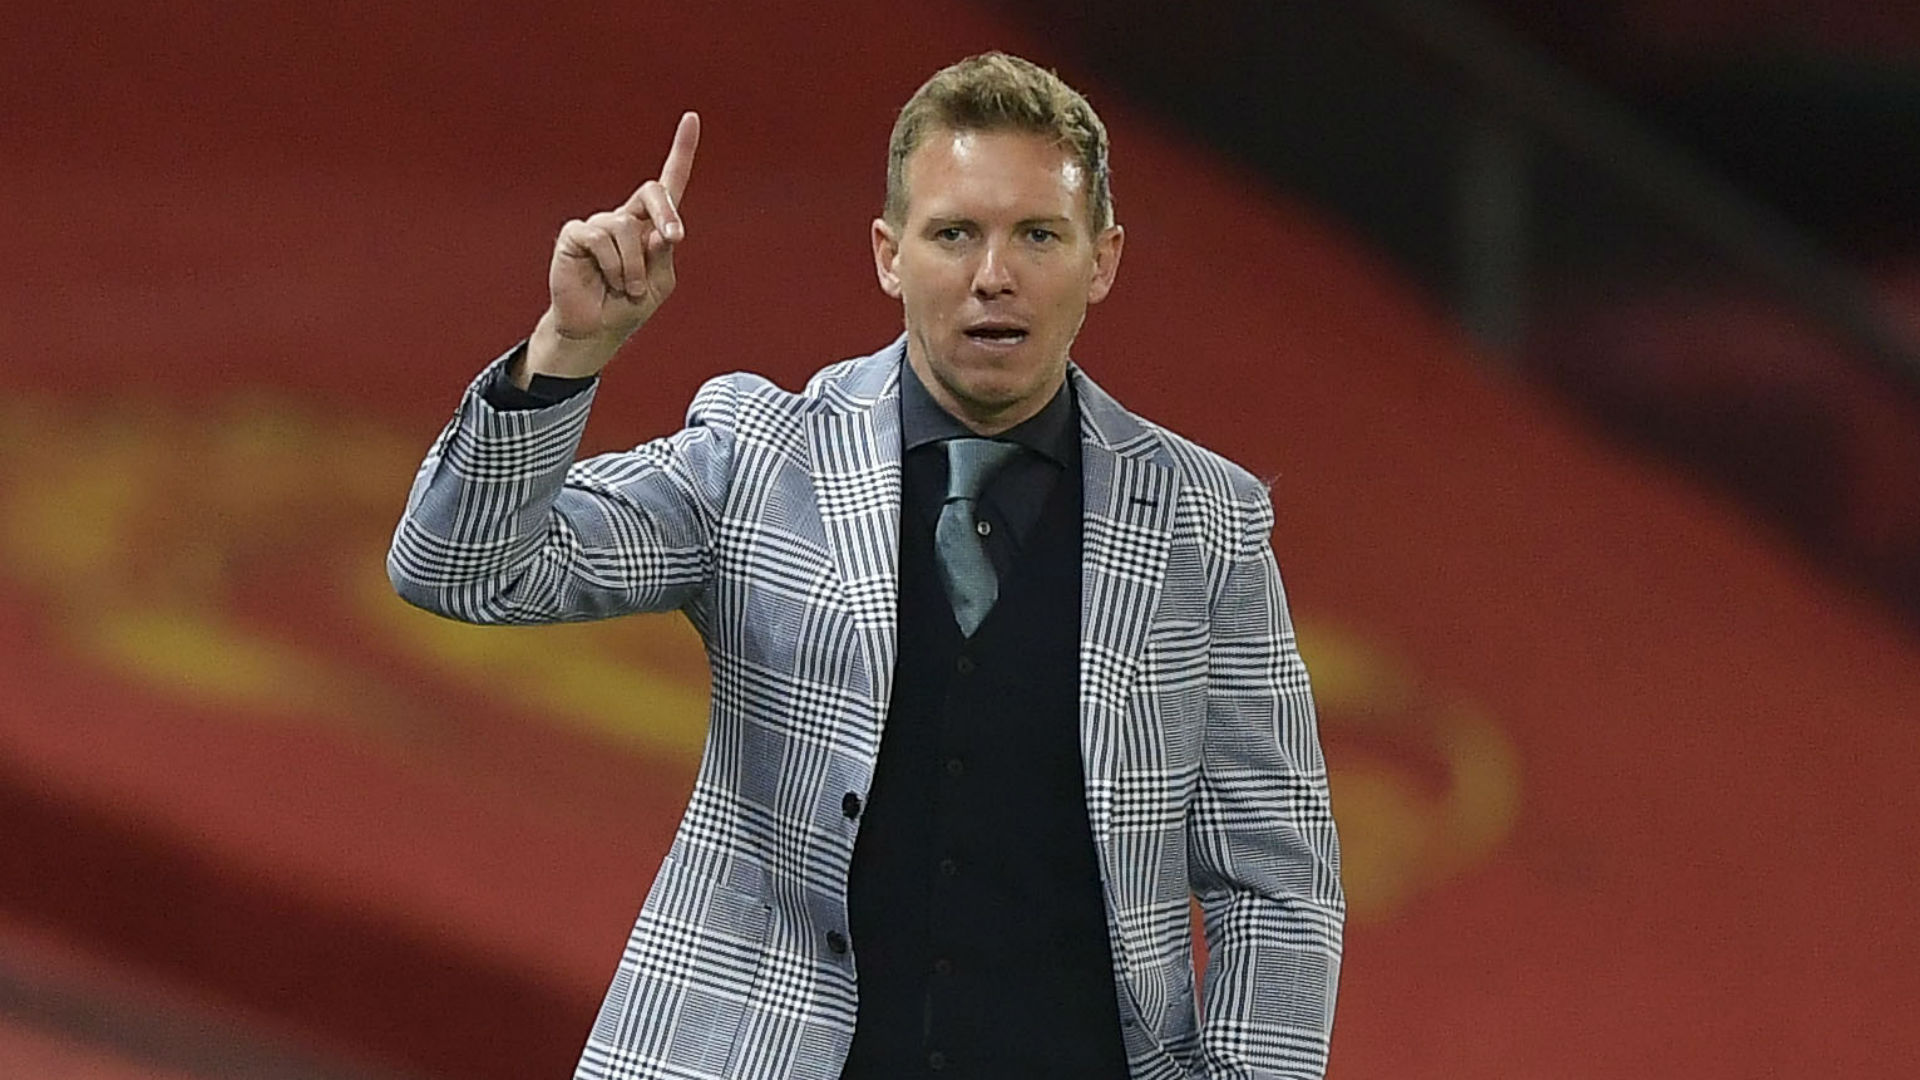 Julian Nagelsmann has urged RB Leipzig to move on from their Champions League humbling at the hands of Manchester United.